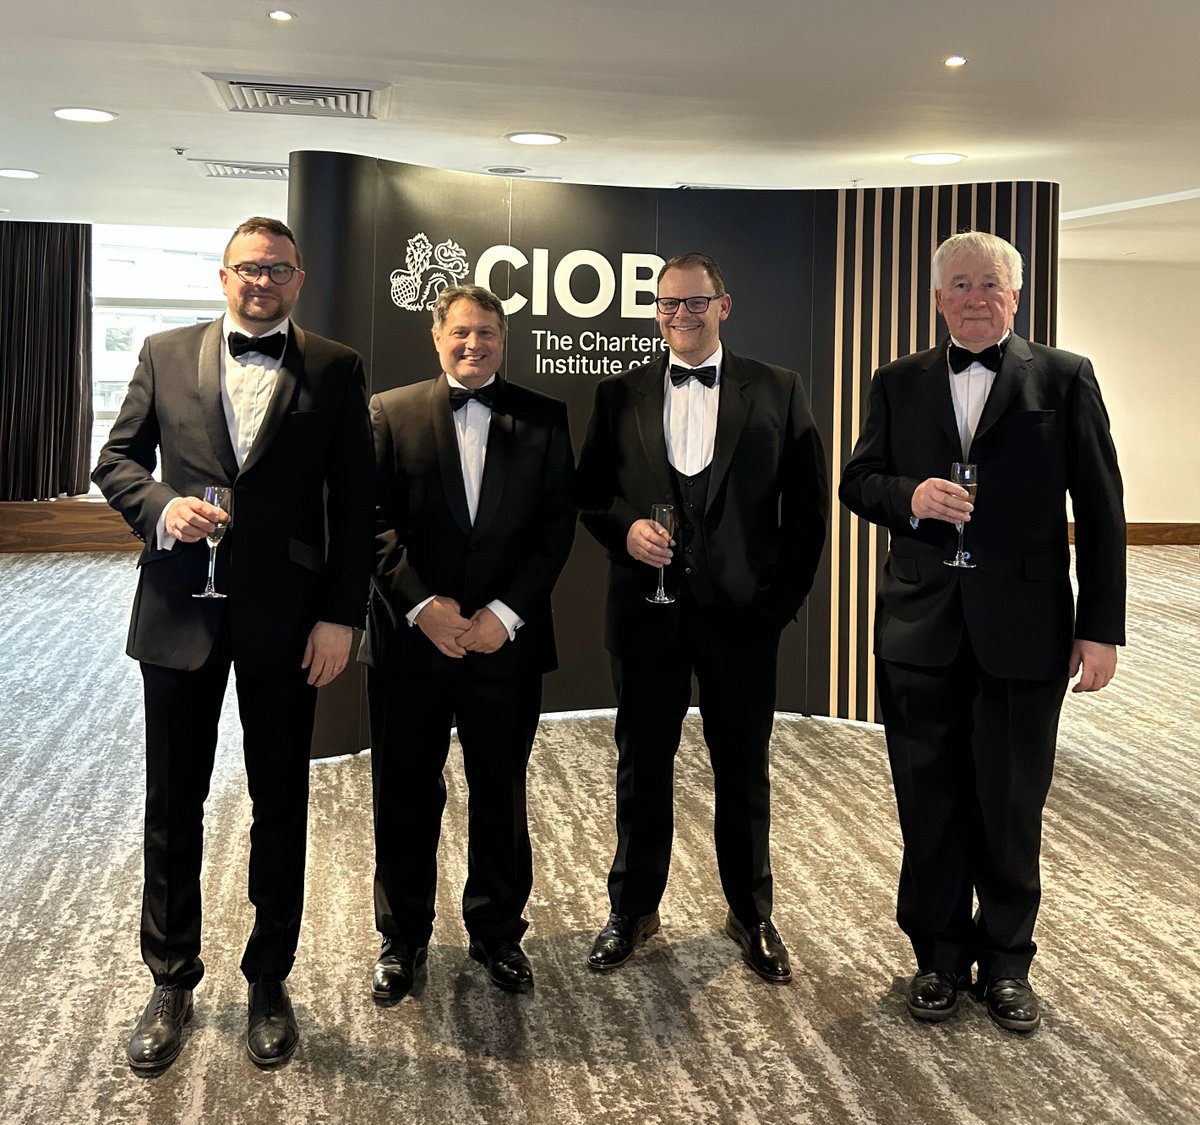 Today, Wayne is back ensuring our Soane Stable Block project runs smoothly at Royal Hospital Chelsea @RHChelsea. Whilst last night didn't see an award win, it was great for members of the team to celebrate Wayne as a finalist at the @theCIOB Awards. #ciobawards #ciob